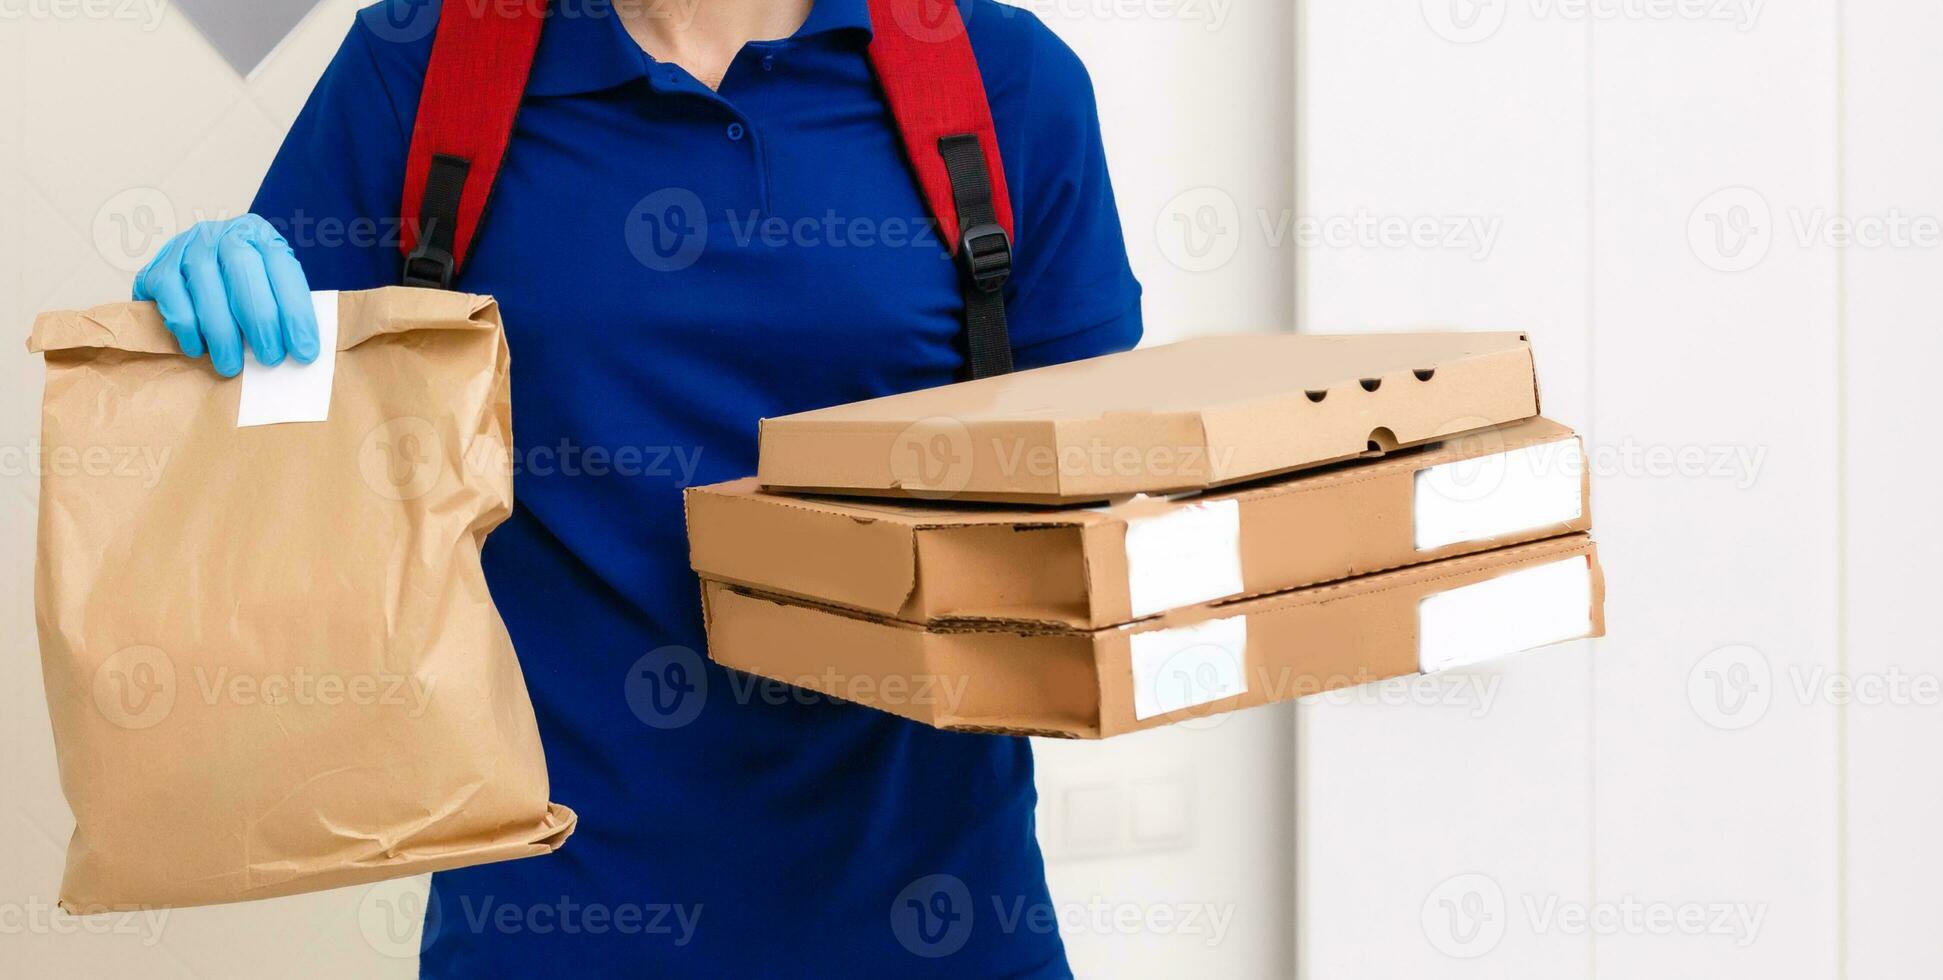 Delivery man employee in red cap t-shirt uniform mask gloves give food order pizza boxes isolated on yellow background studio. Service quarantine pandemic coronavirus virus flu 2019-ncov concept photo